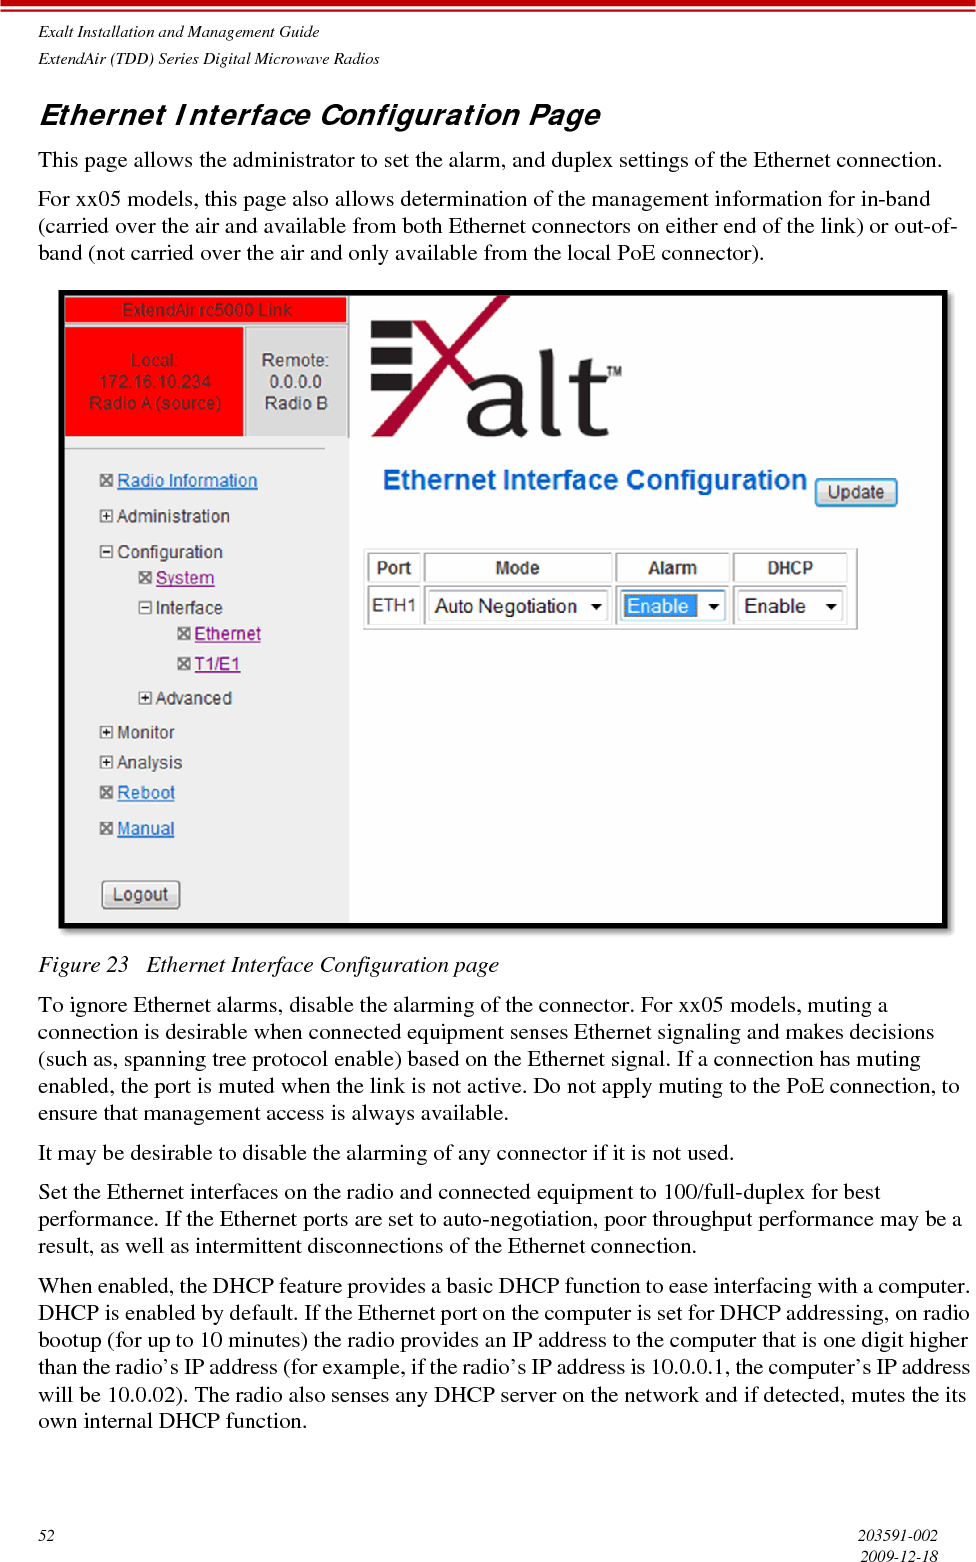 Exalt Installation and Management GuideExtendAir (TDD) Series Digital Microwave Radios52 203591-0022009-12-18Ethernet Interface Configuration PageThis page allows the administrator to set the alarm, and duplex settings of the Ethernet connection. For xx05 models, this page also allows determination of the management information for in-band (carried over the air and available from both Ethernet connectors on either end of the link) or out-of-band (not carried over the air and only available from the local PoE connector).Figure 23   Ethernet Interface Configuration pageTo ignore Ethernet alarms, disable the alarming of the connector. For xx05 models, muting a connection is desirable when connected equipment senses Ethernet signaling and makes decisions (such as, spanning tree protocol enable) based on the Ethernet signal. If a connection has muting enabled, the port is muted when the link is not active. Do not apply muting to the PoE connection, to ensure that management access is always available.It may be desirable to disable the alarming of any connector if it is not used.Set the Ethernet interfaces on the radio and connected equipment to 100/full-duplex for best performance. If the Ethernet ports are set to auto-negotiation, poor throughput performance may be a result, as well as intermittent disconnections of the Ethernet connection. When enabled, the DHCP feature provides a basic DHCP function to ease interfacing with a computer. DHCP is enabled by default. If the Ethernet port on the computer is set for DHCP addressing, on radio bootup (for up to 10 minutes) the radio provides an IP address to the computer that is one digit higher than the radio’s IP address (for example, if the radio’s IP address is 10.0.0.1, the computer’s IP address will be 10.0.02). The radio also senses any DHCP server on the network and if detected, mutes the its own internal DHCP function.